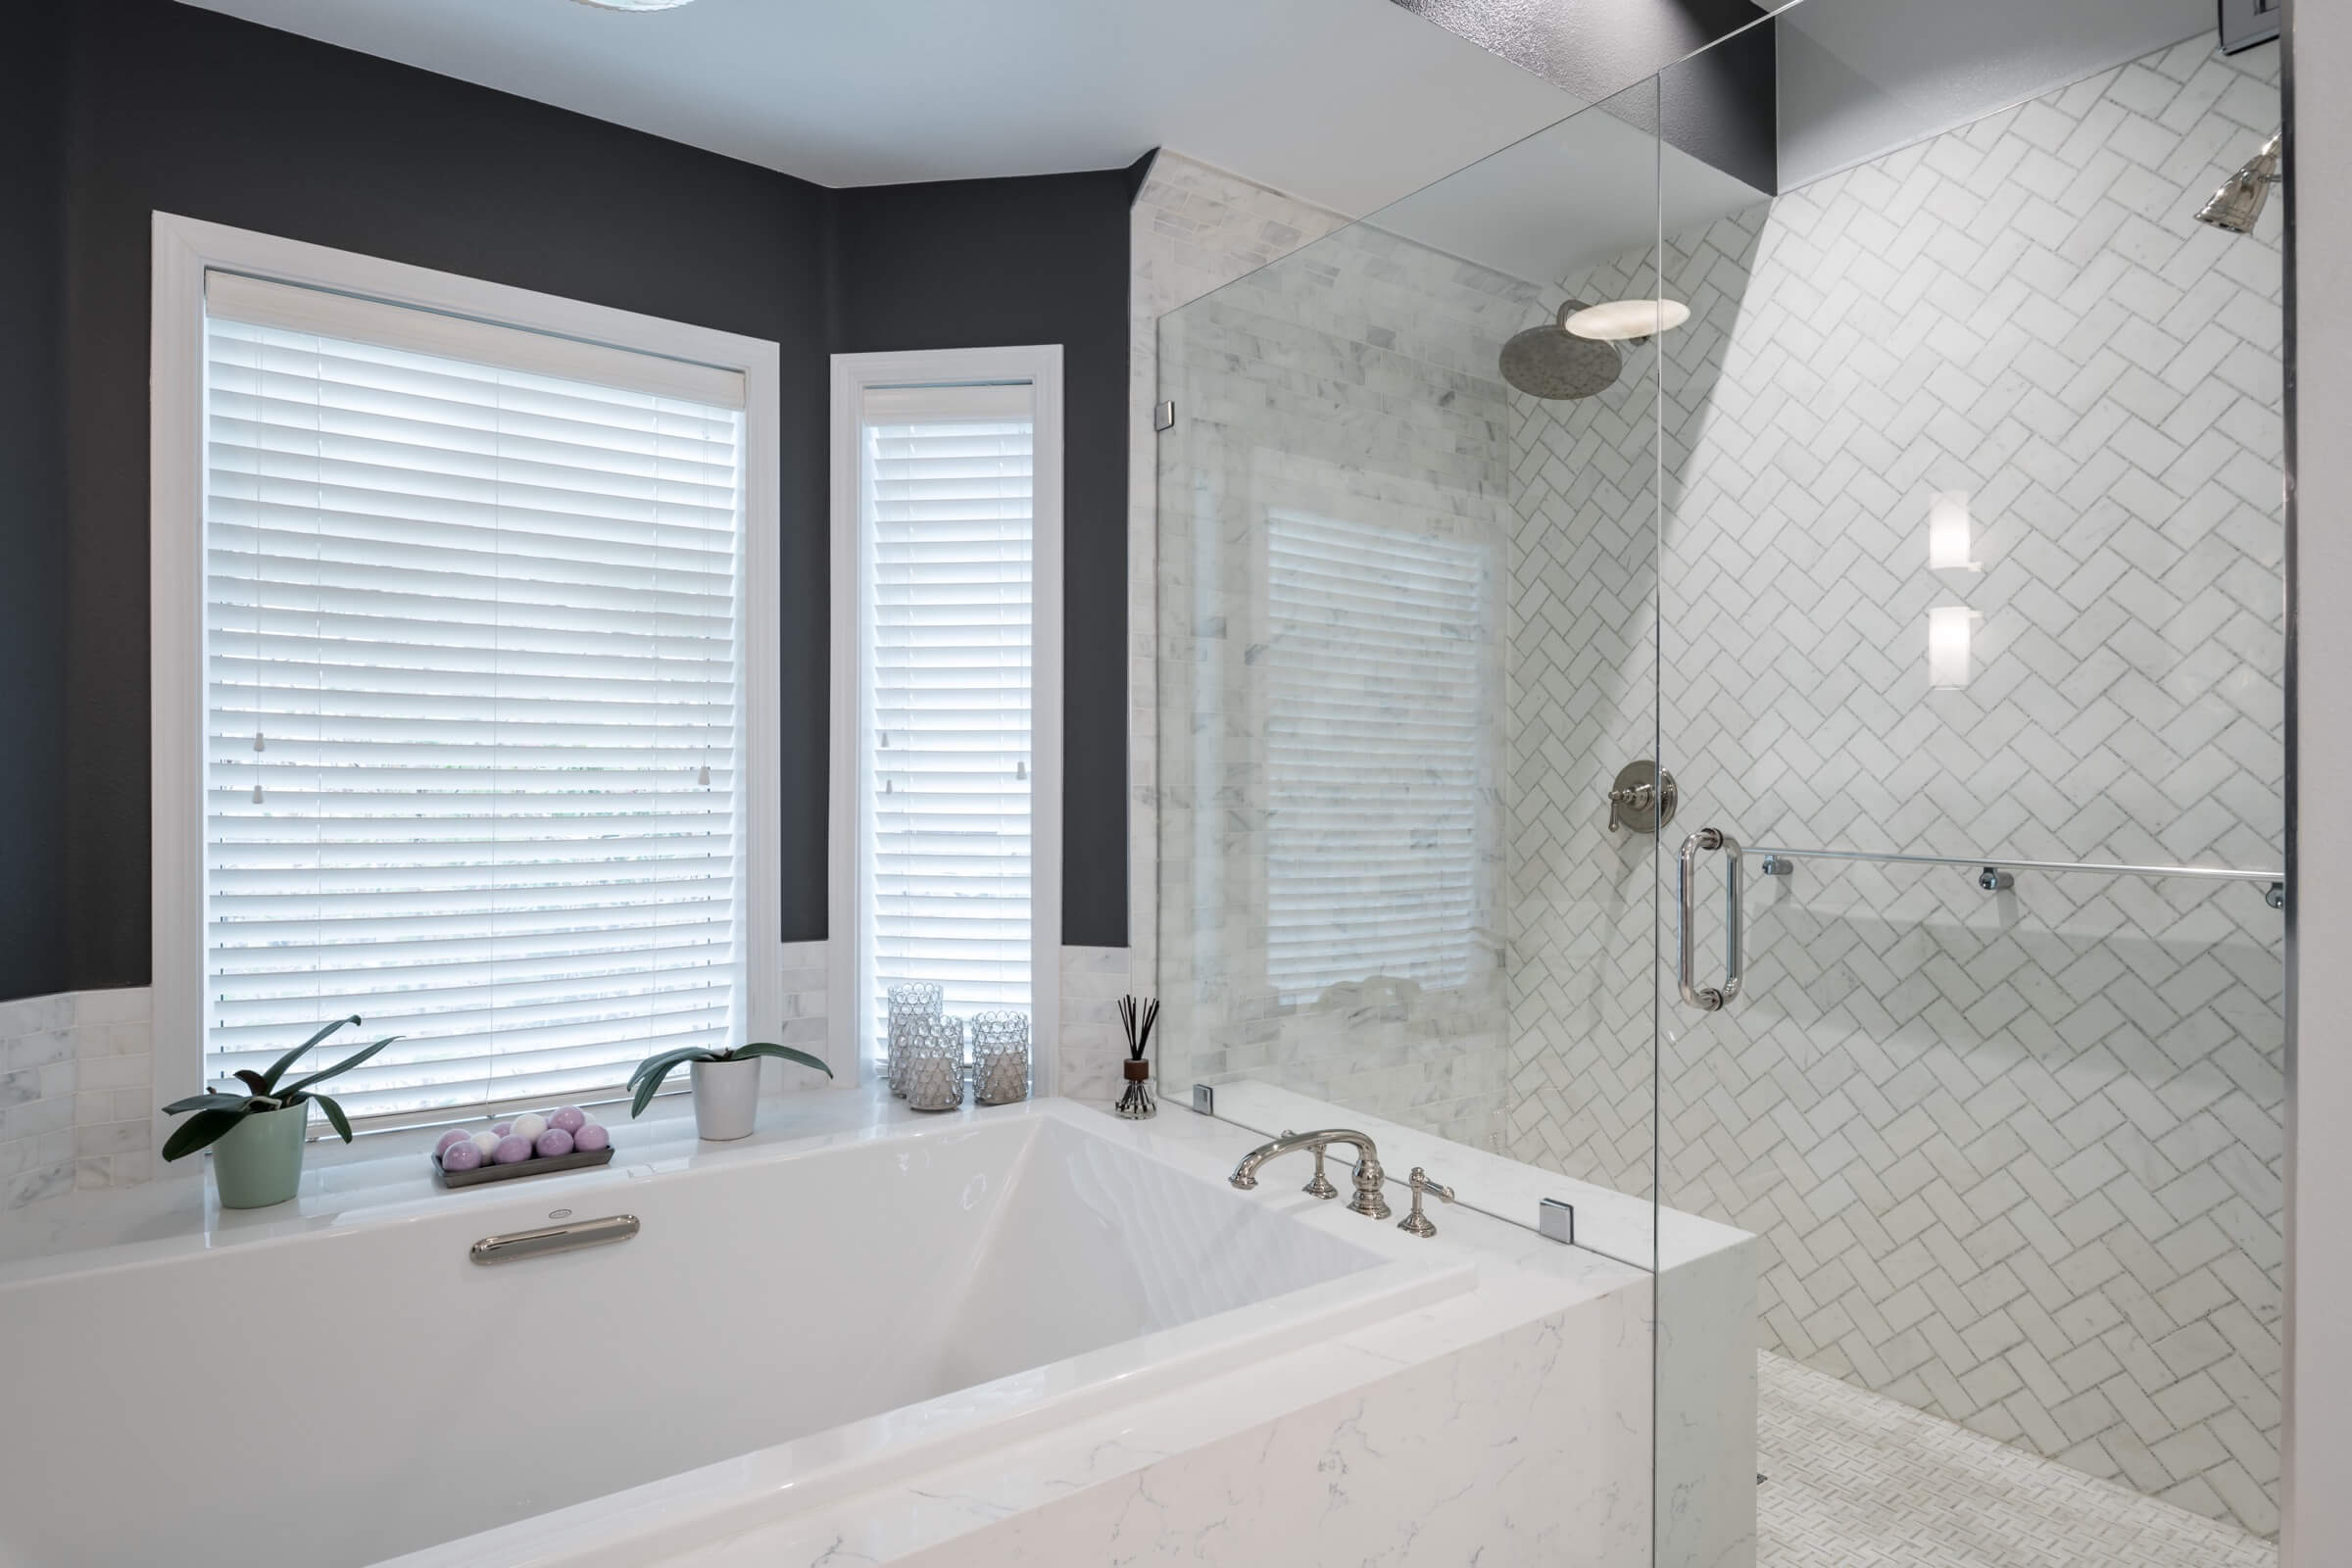 Transitional bathroom remodel from FiveWest 